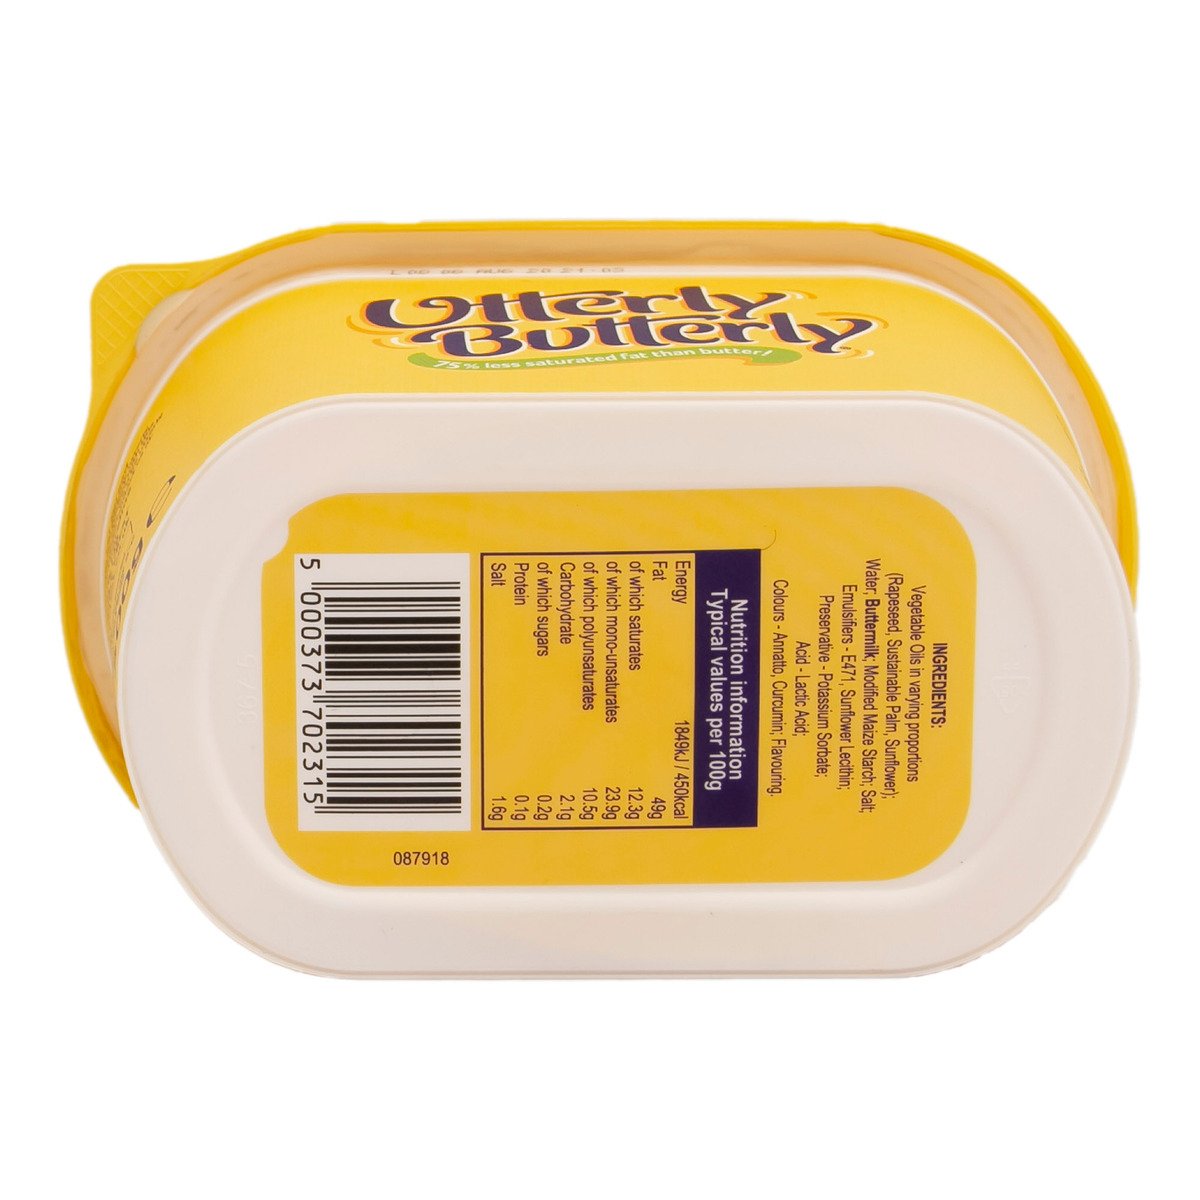 SI Utterly Butterly Spread 500 g